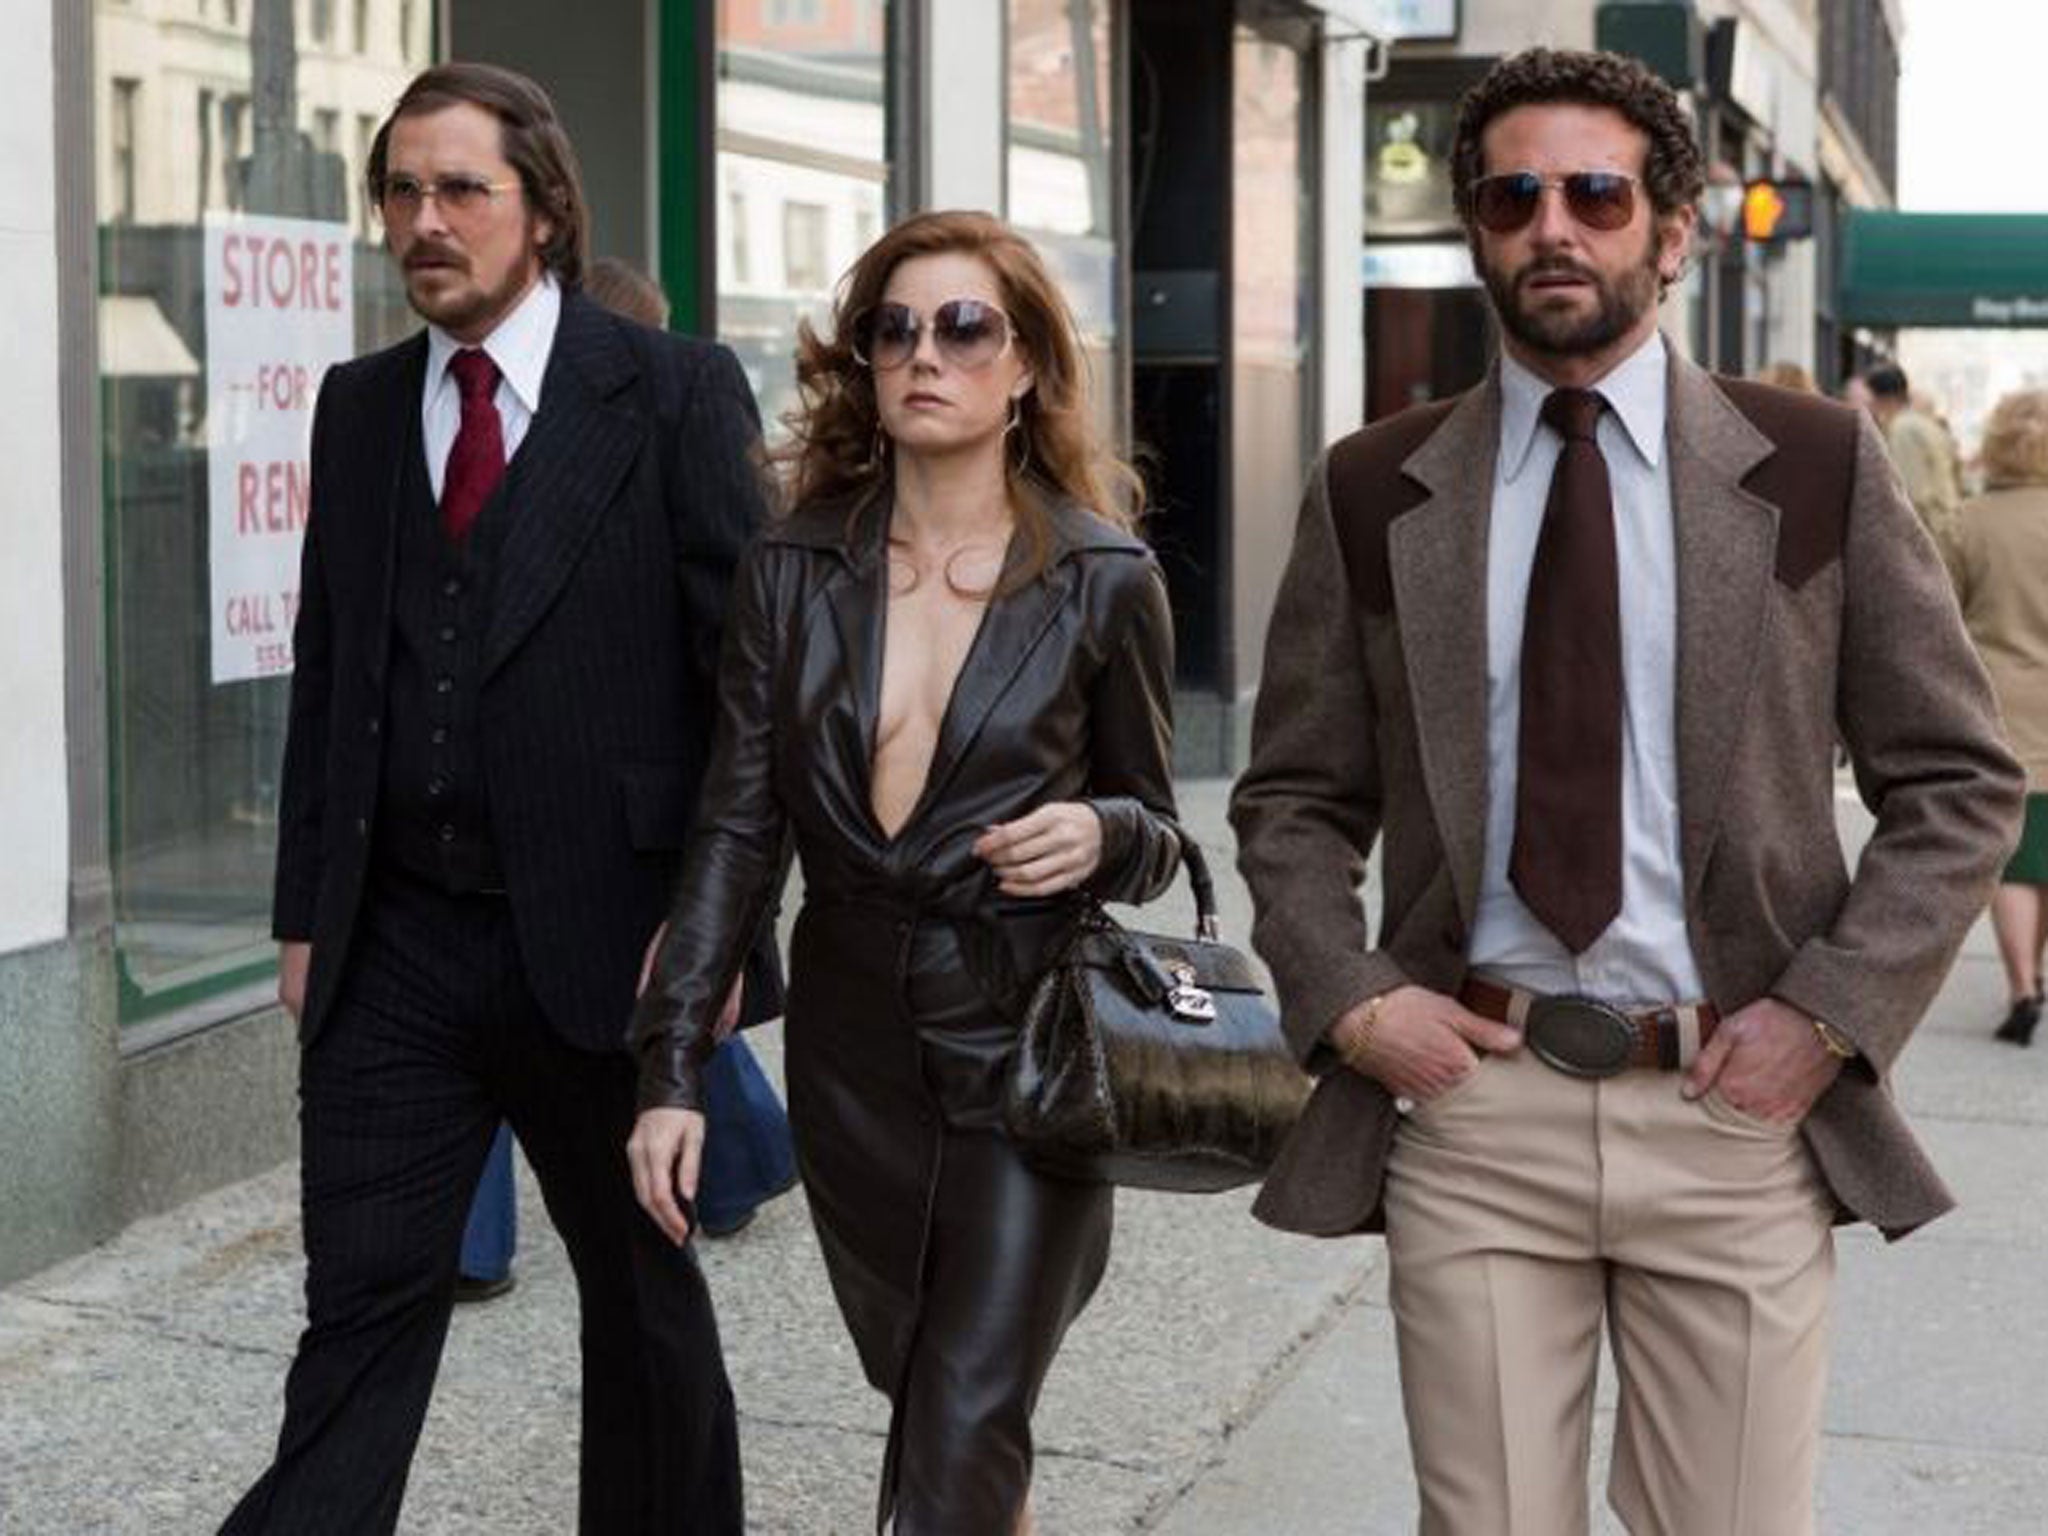 All star cast: Christian Bale, Amy Adams and Bradley Cooper in ‘American Hustle’